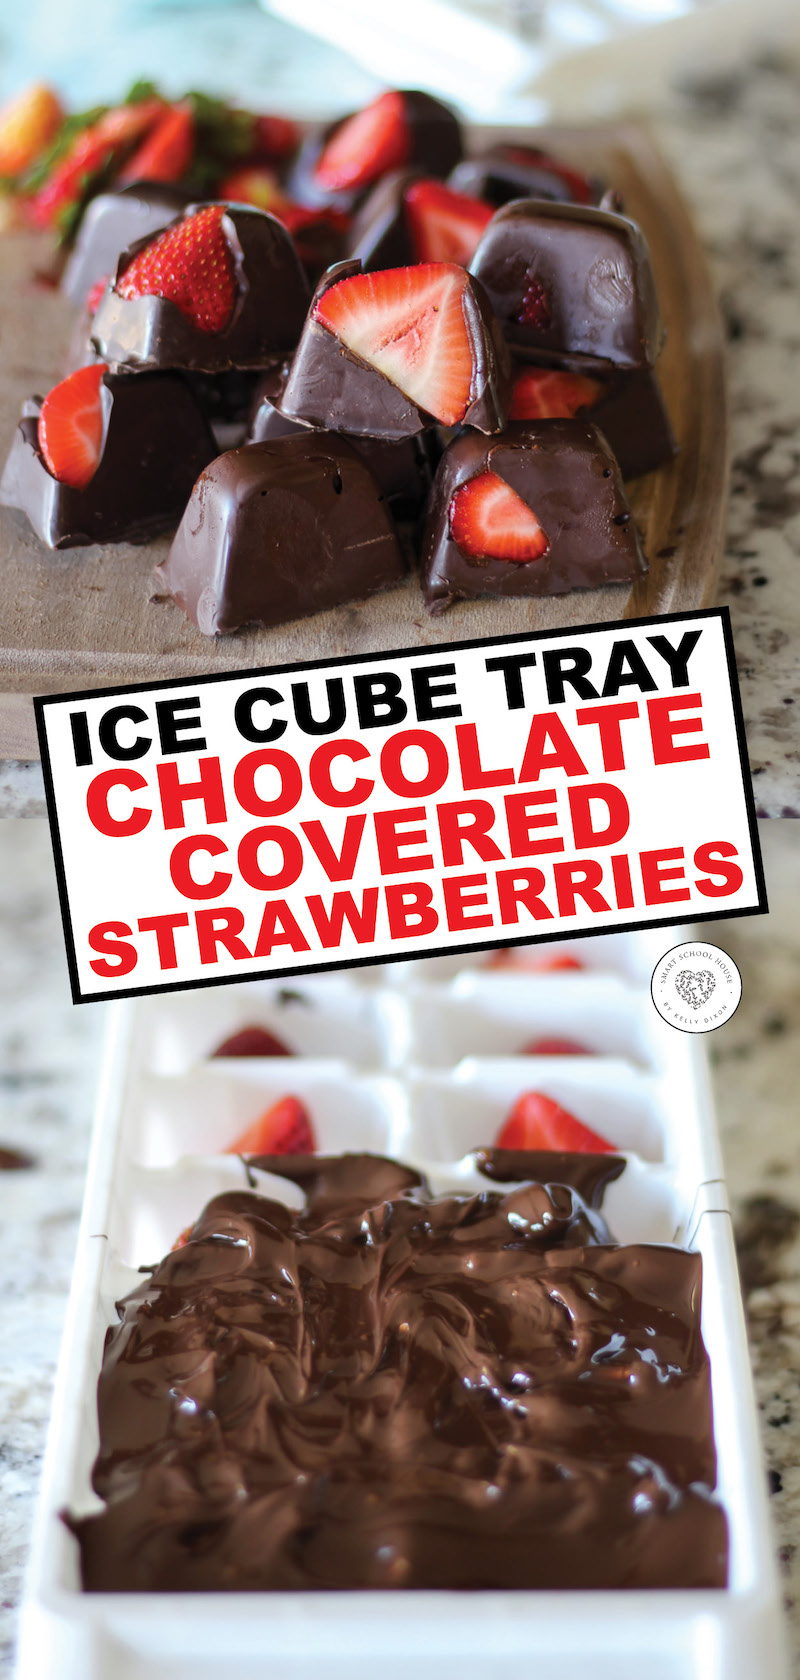 Chocolate covered strawberries are just about the best food around. Here is a easy, fun new recipe for easy chocolate covered strawberries. Delicious chocolate covered strawberries that can be made in an ice cube tray in about 5 minutes. Enjoy some delicious chocolate covered strawberries at your next party, or for your next relaxing night at home. #chocolate #strawberries #chocolatecoveredstrawberries #dessert #party #recipe #smartschoolhouse